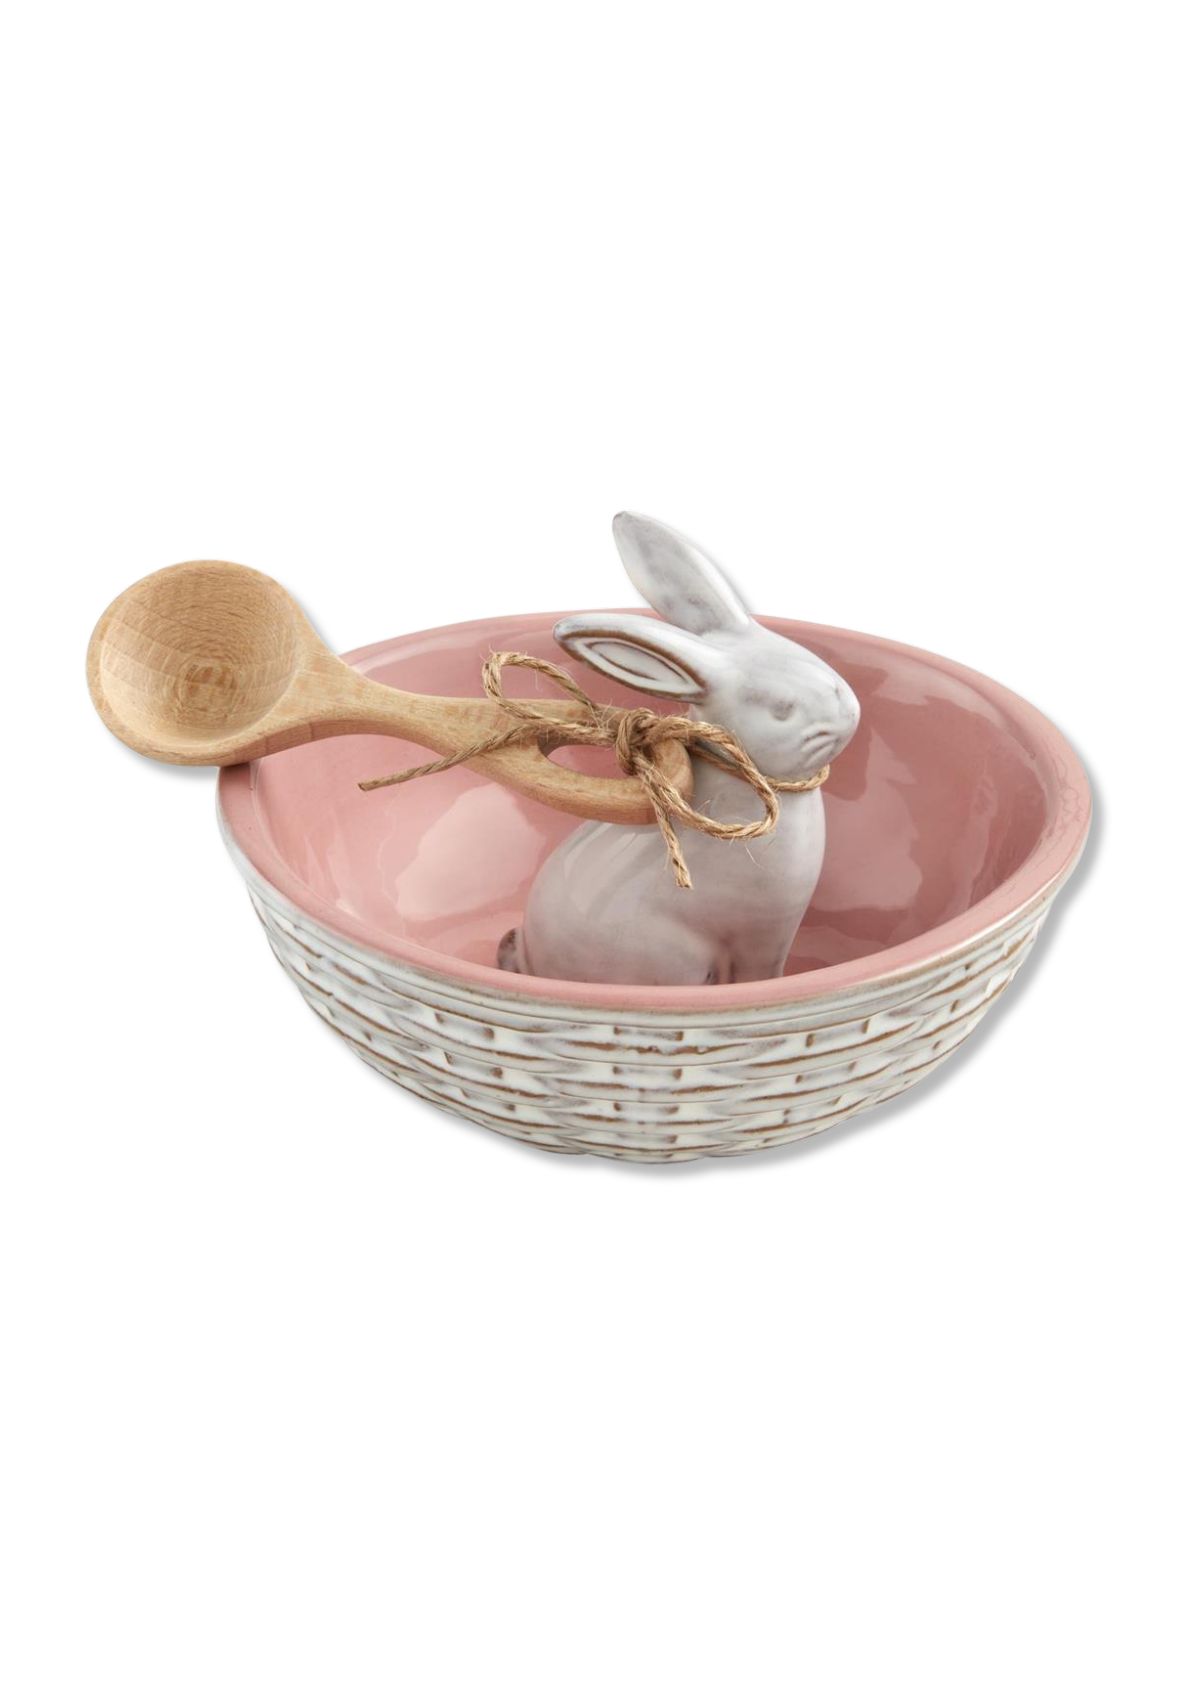 White bunny with pink exterior/interior bowl with rabbit in middle. Comes with brown wooden spoon.